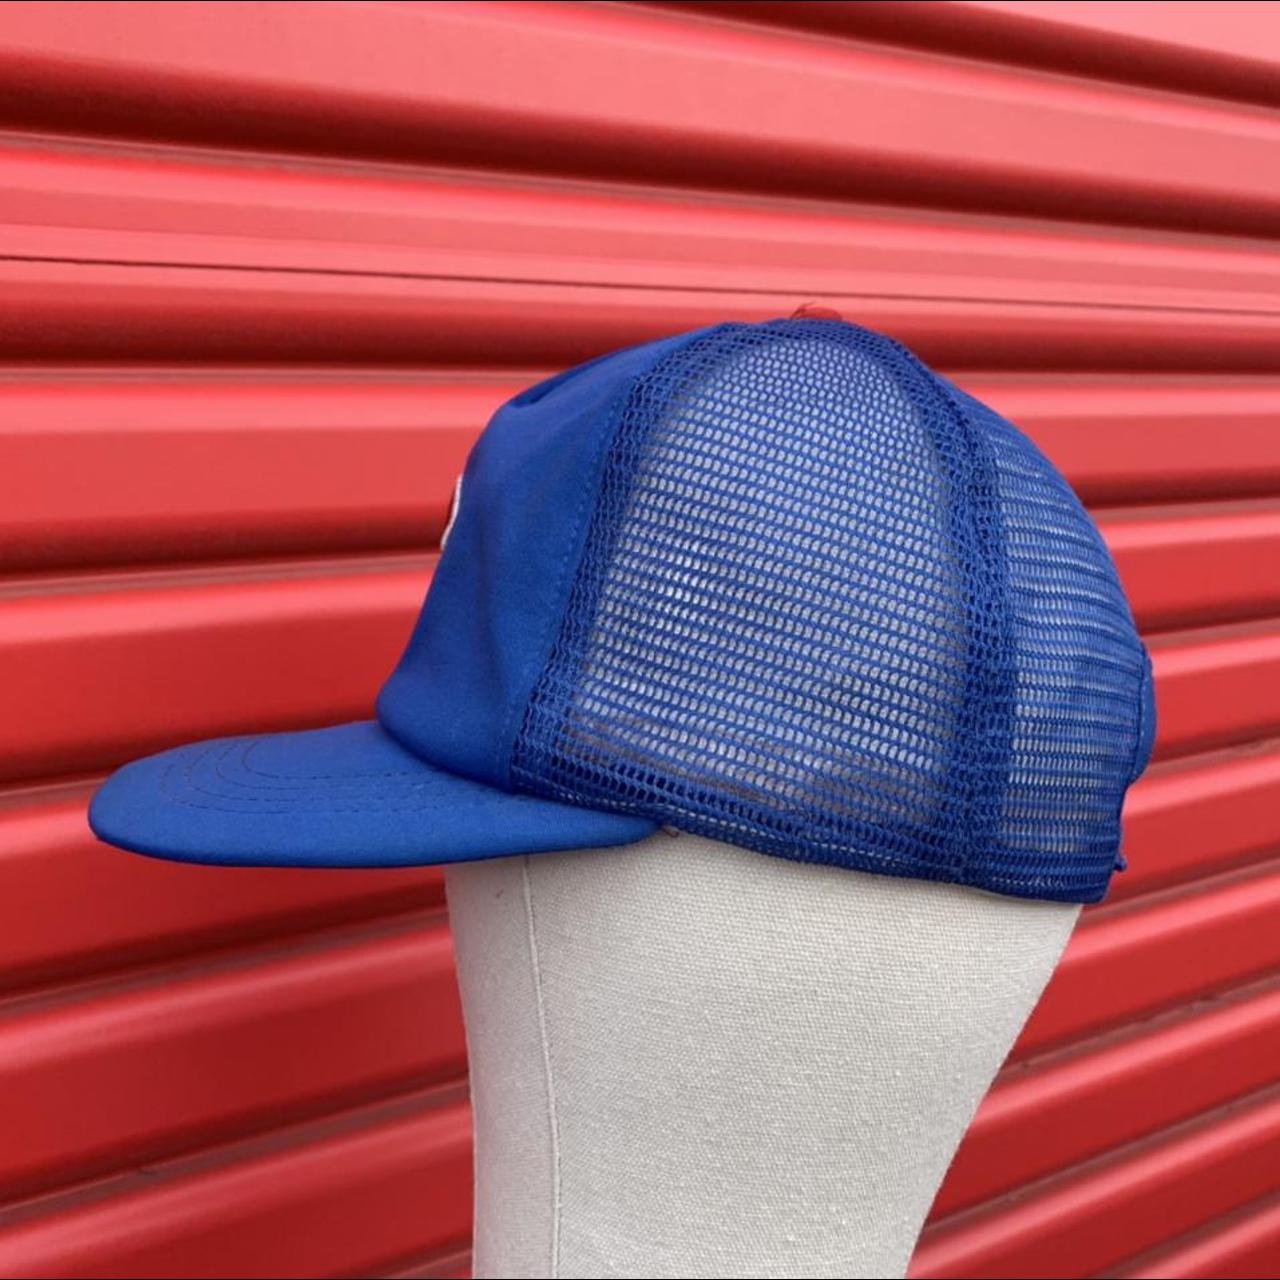 American Vintage Men's Red and Blue Hat (3)